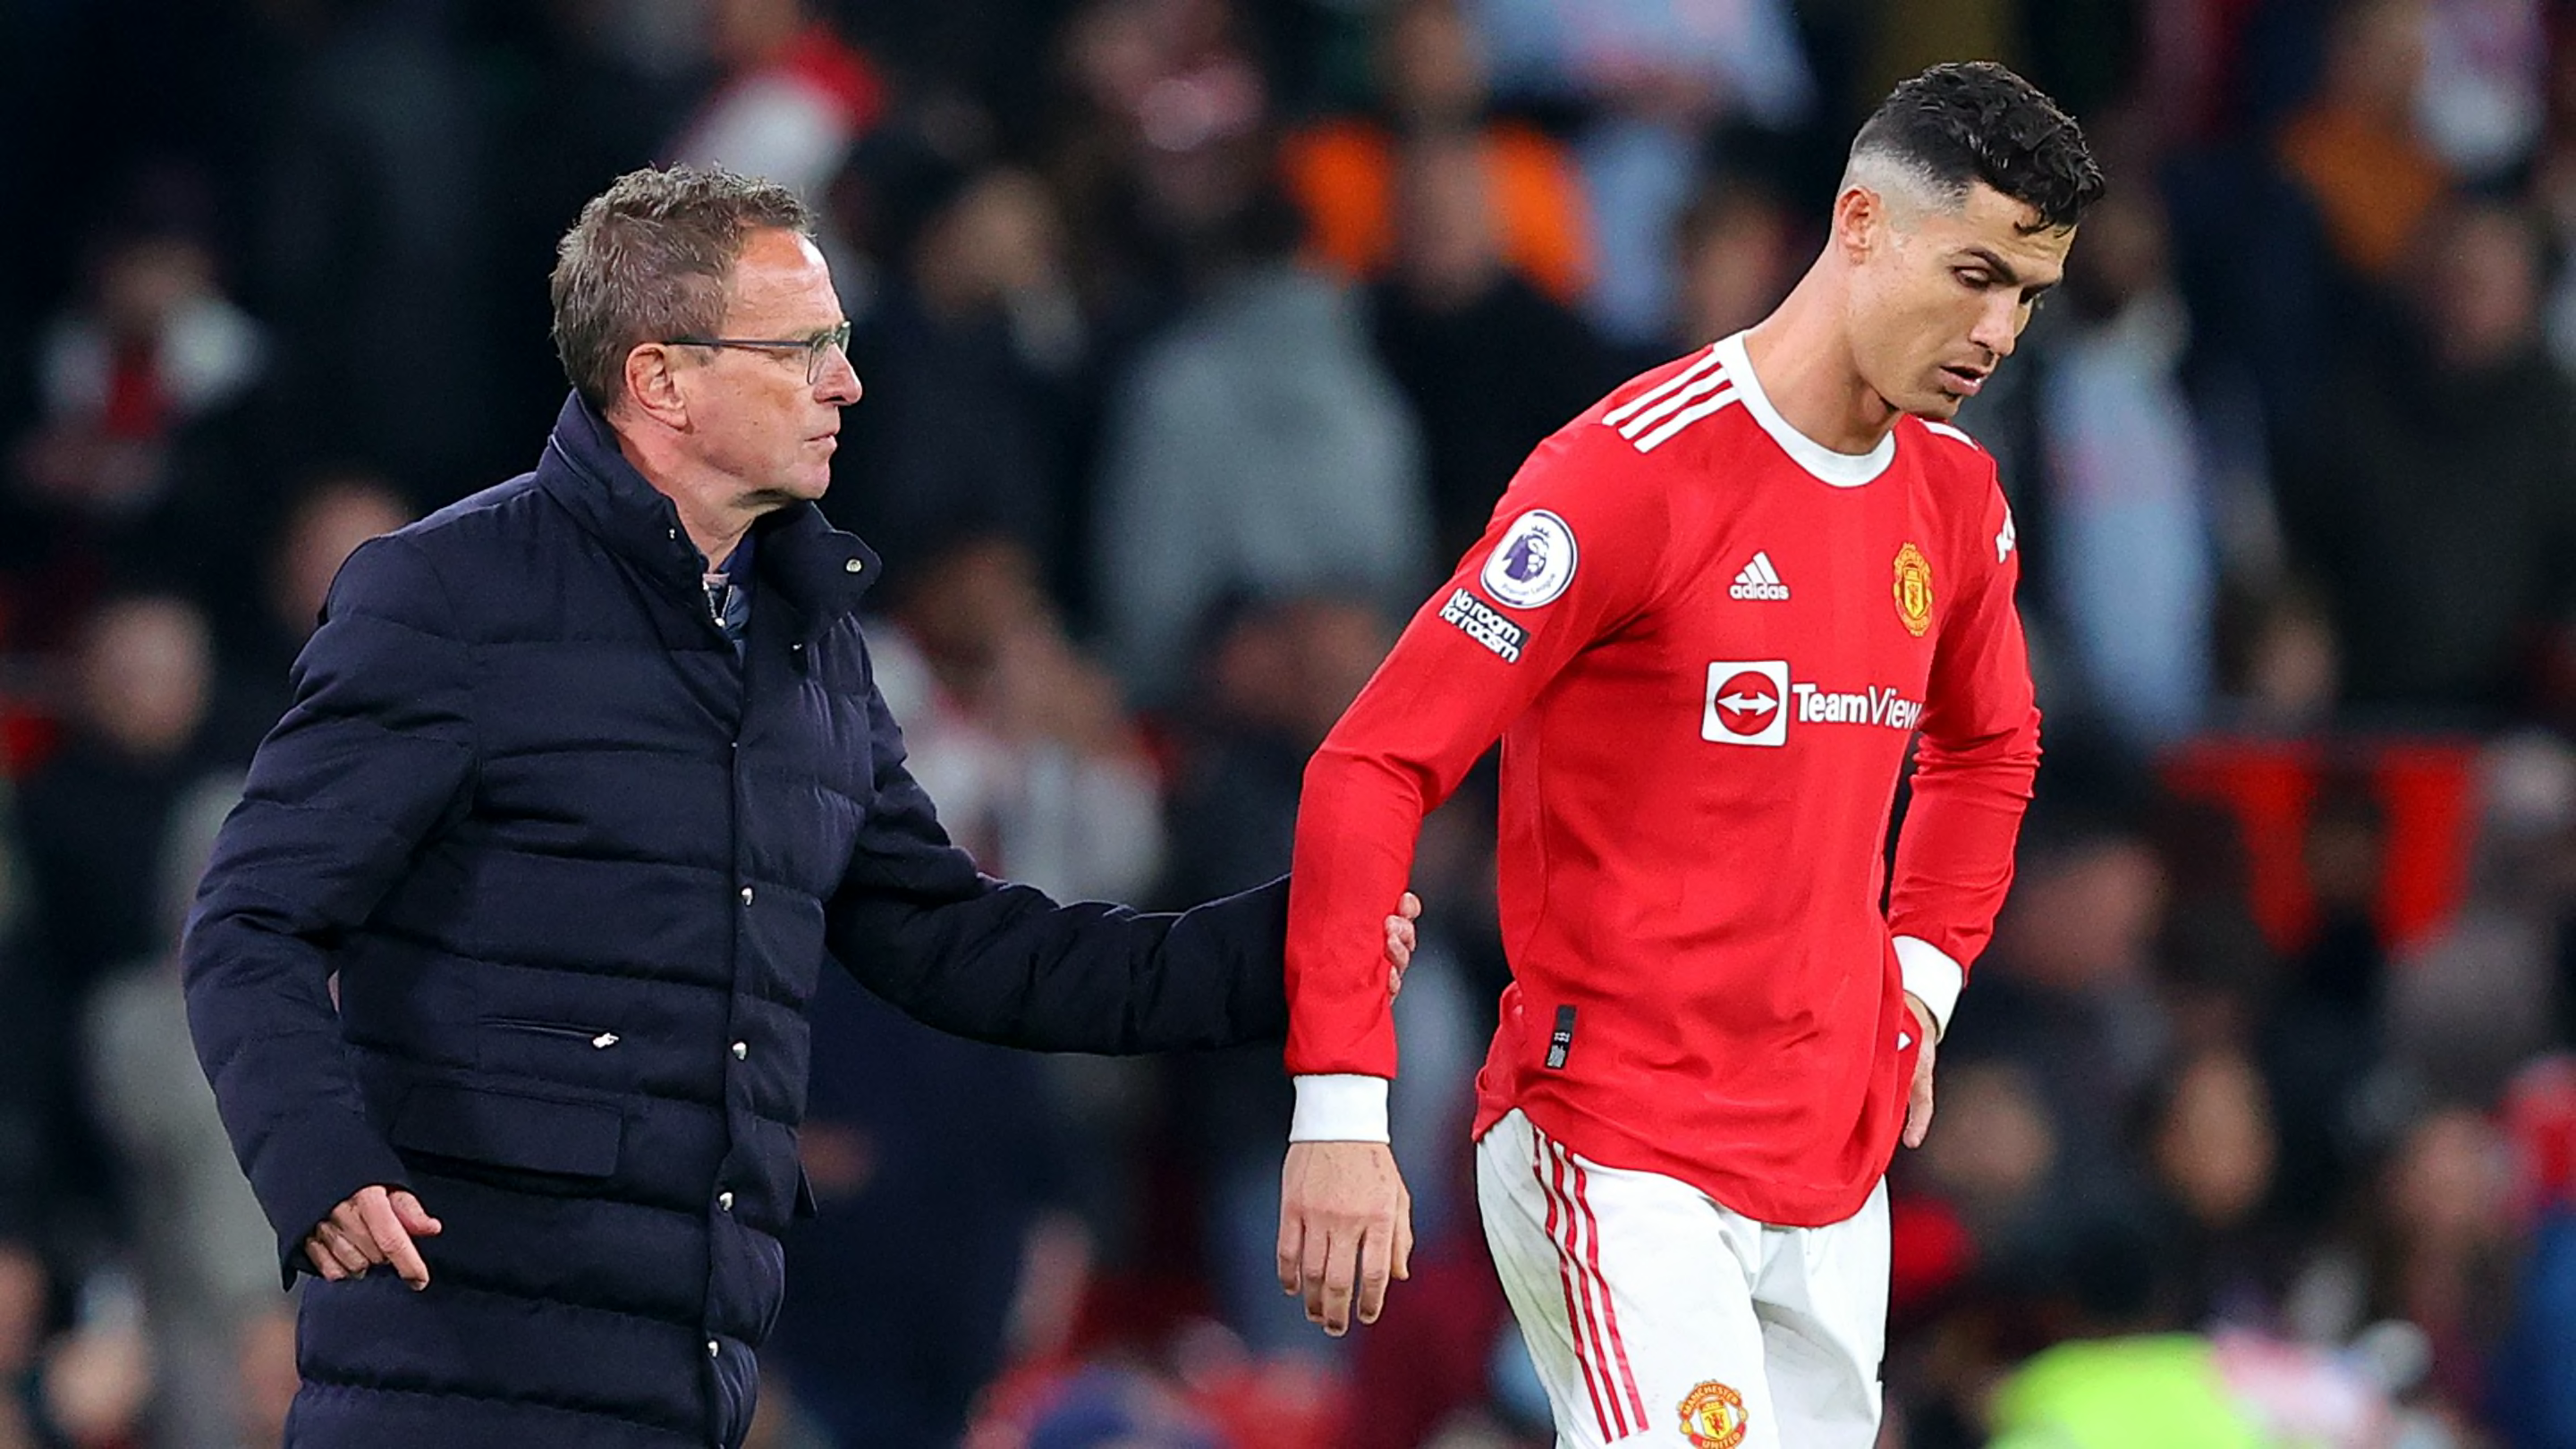 Cristiano Ronaldo's specific 'demand' to Ralf Rangnick during time at Man Utd revealed